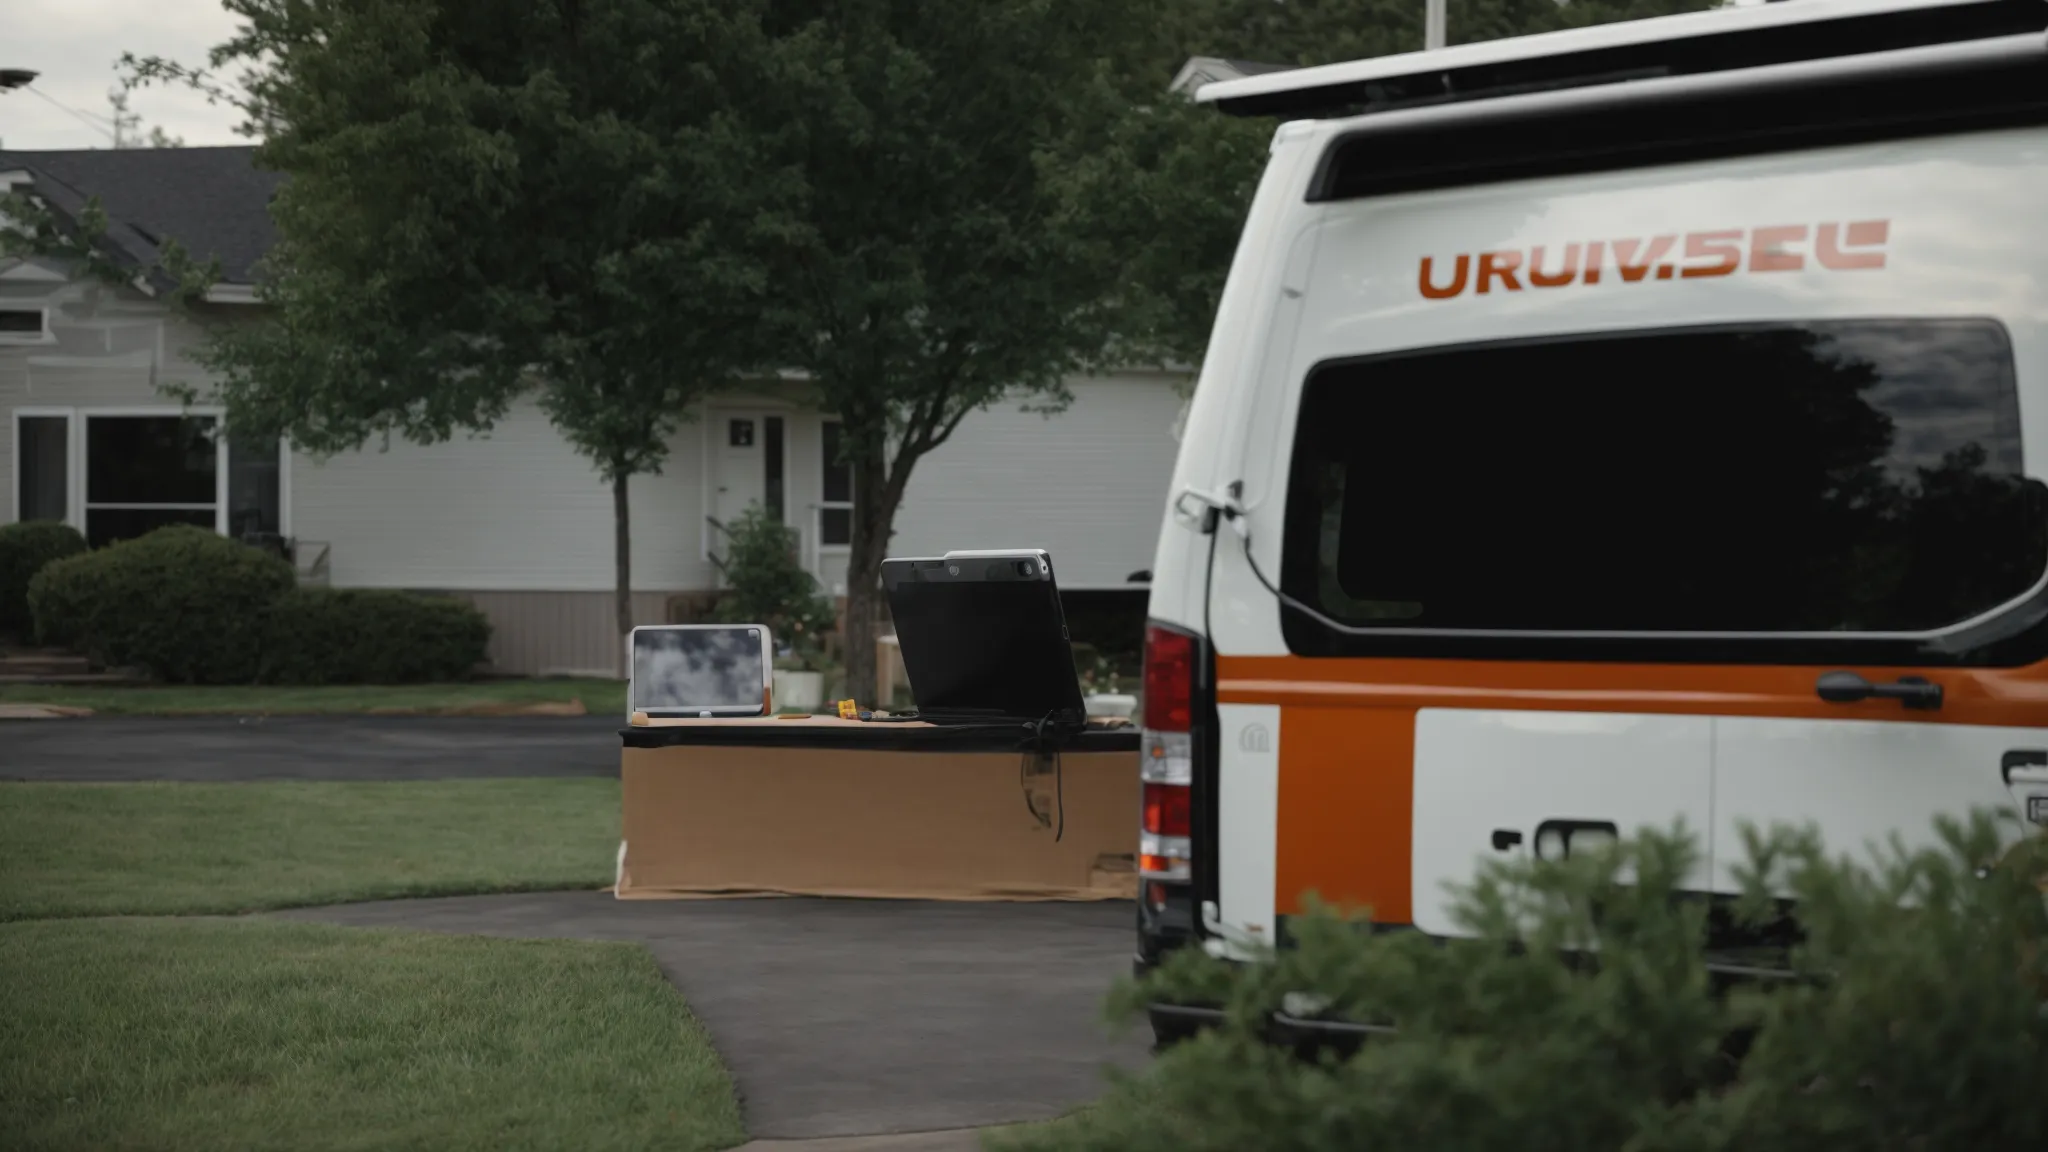 a contractor consulting his tablet while standing in front of a service van, parked in a suburban neighborhood.